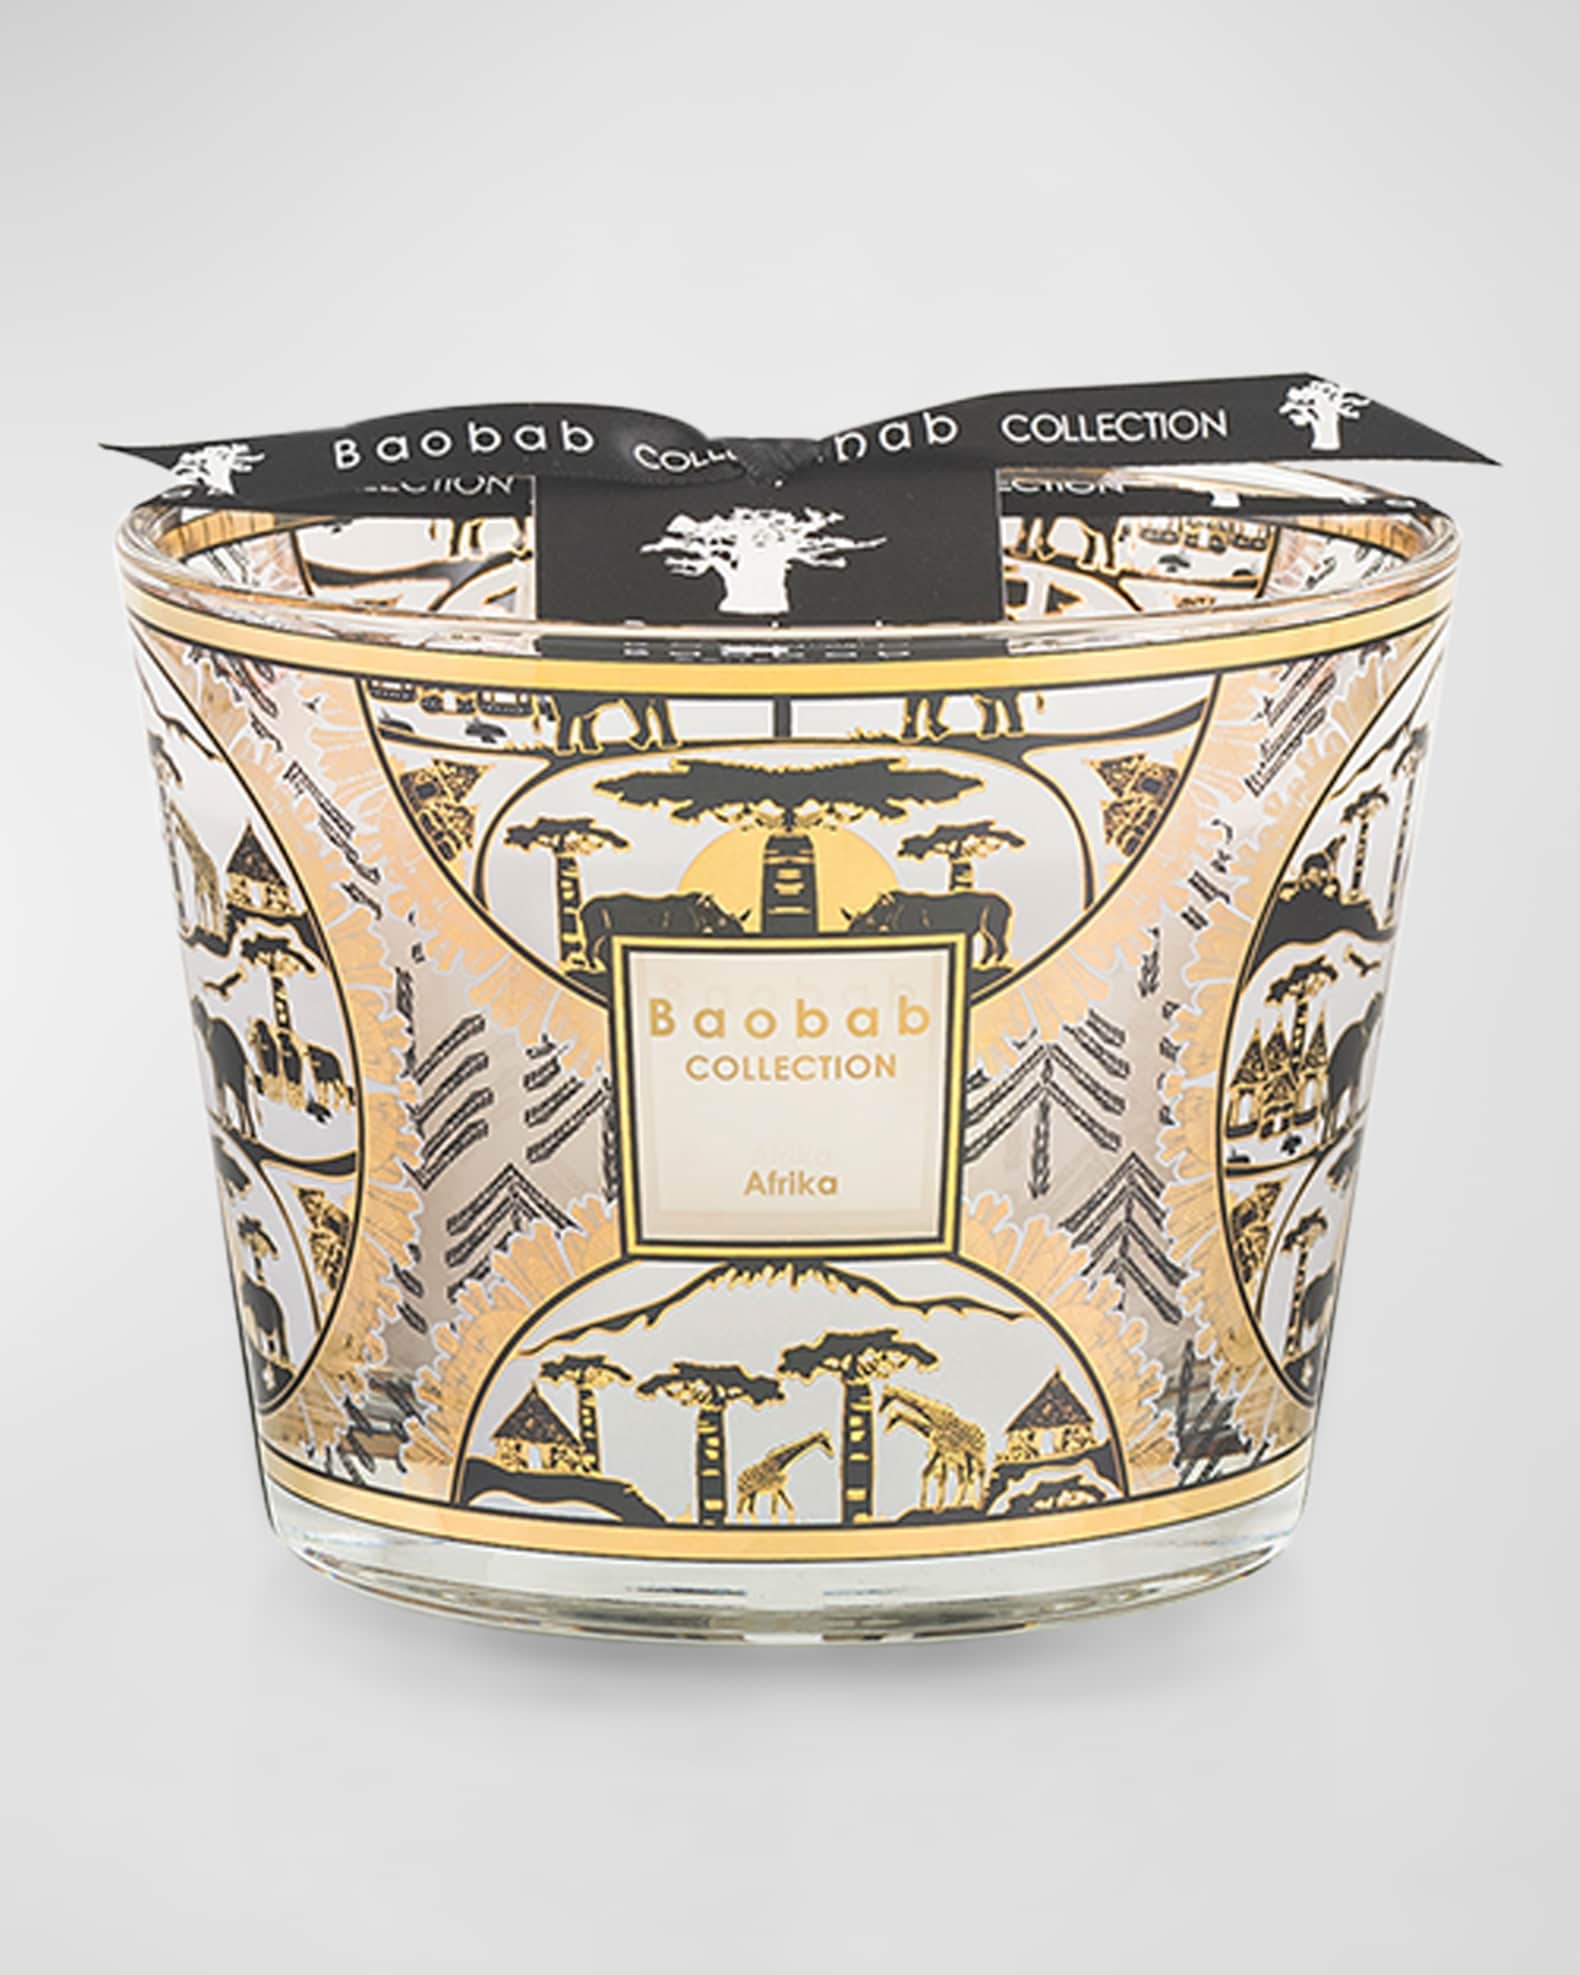 Baobab Collection Afrika 4-Wick Max10 Candle, 47.6 oz. | Horchow